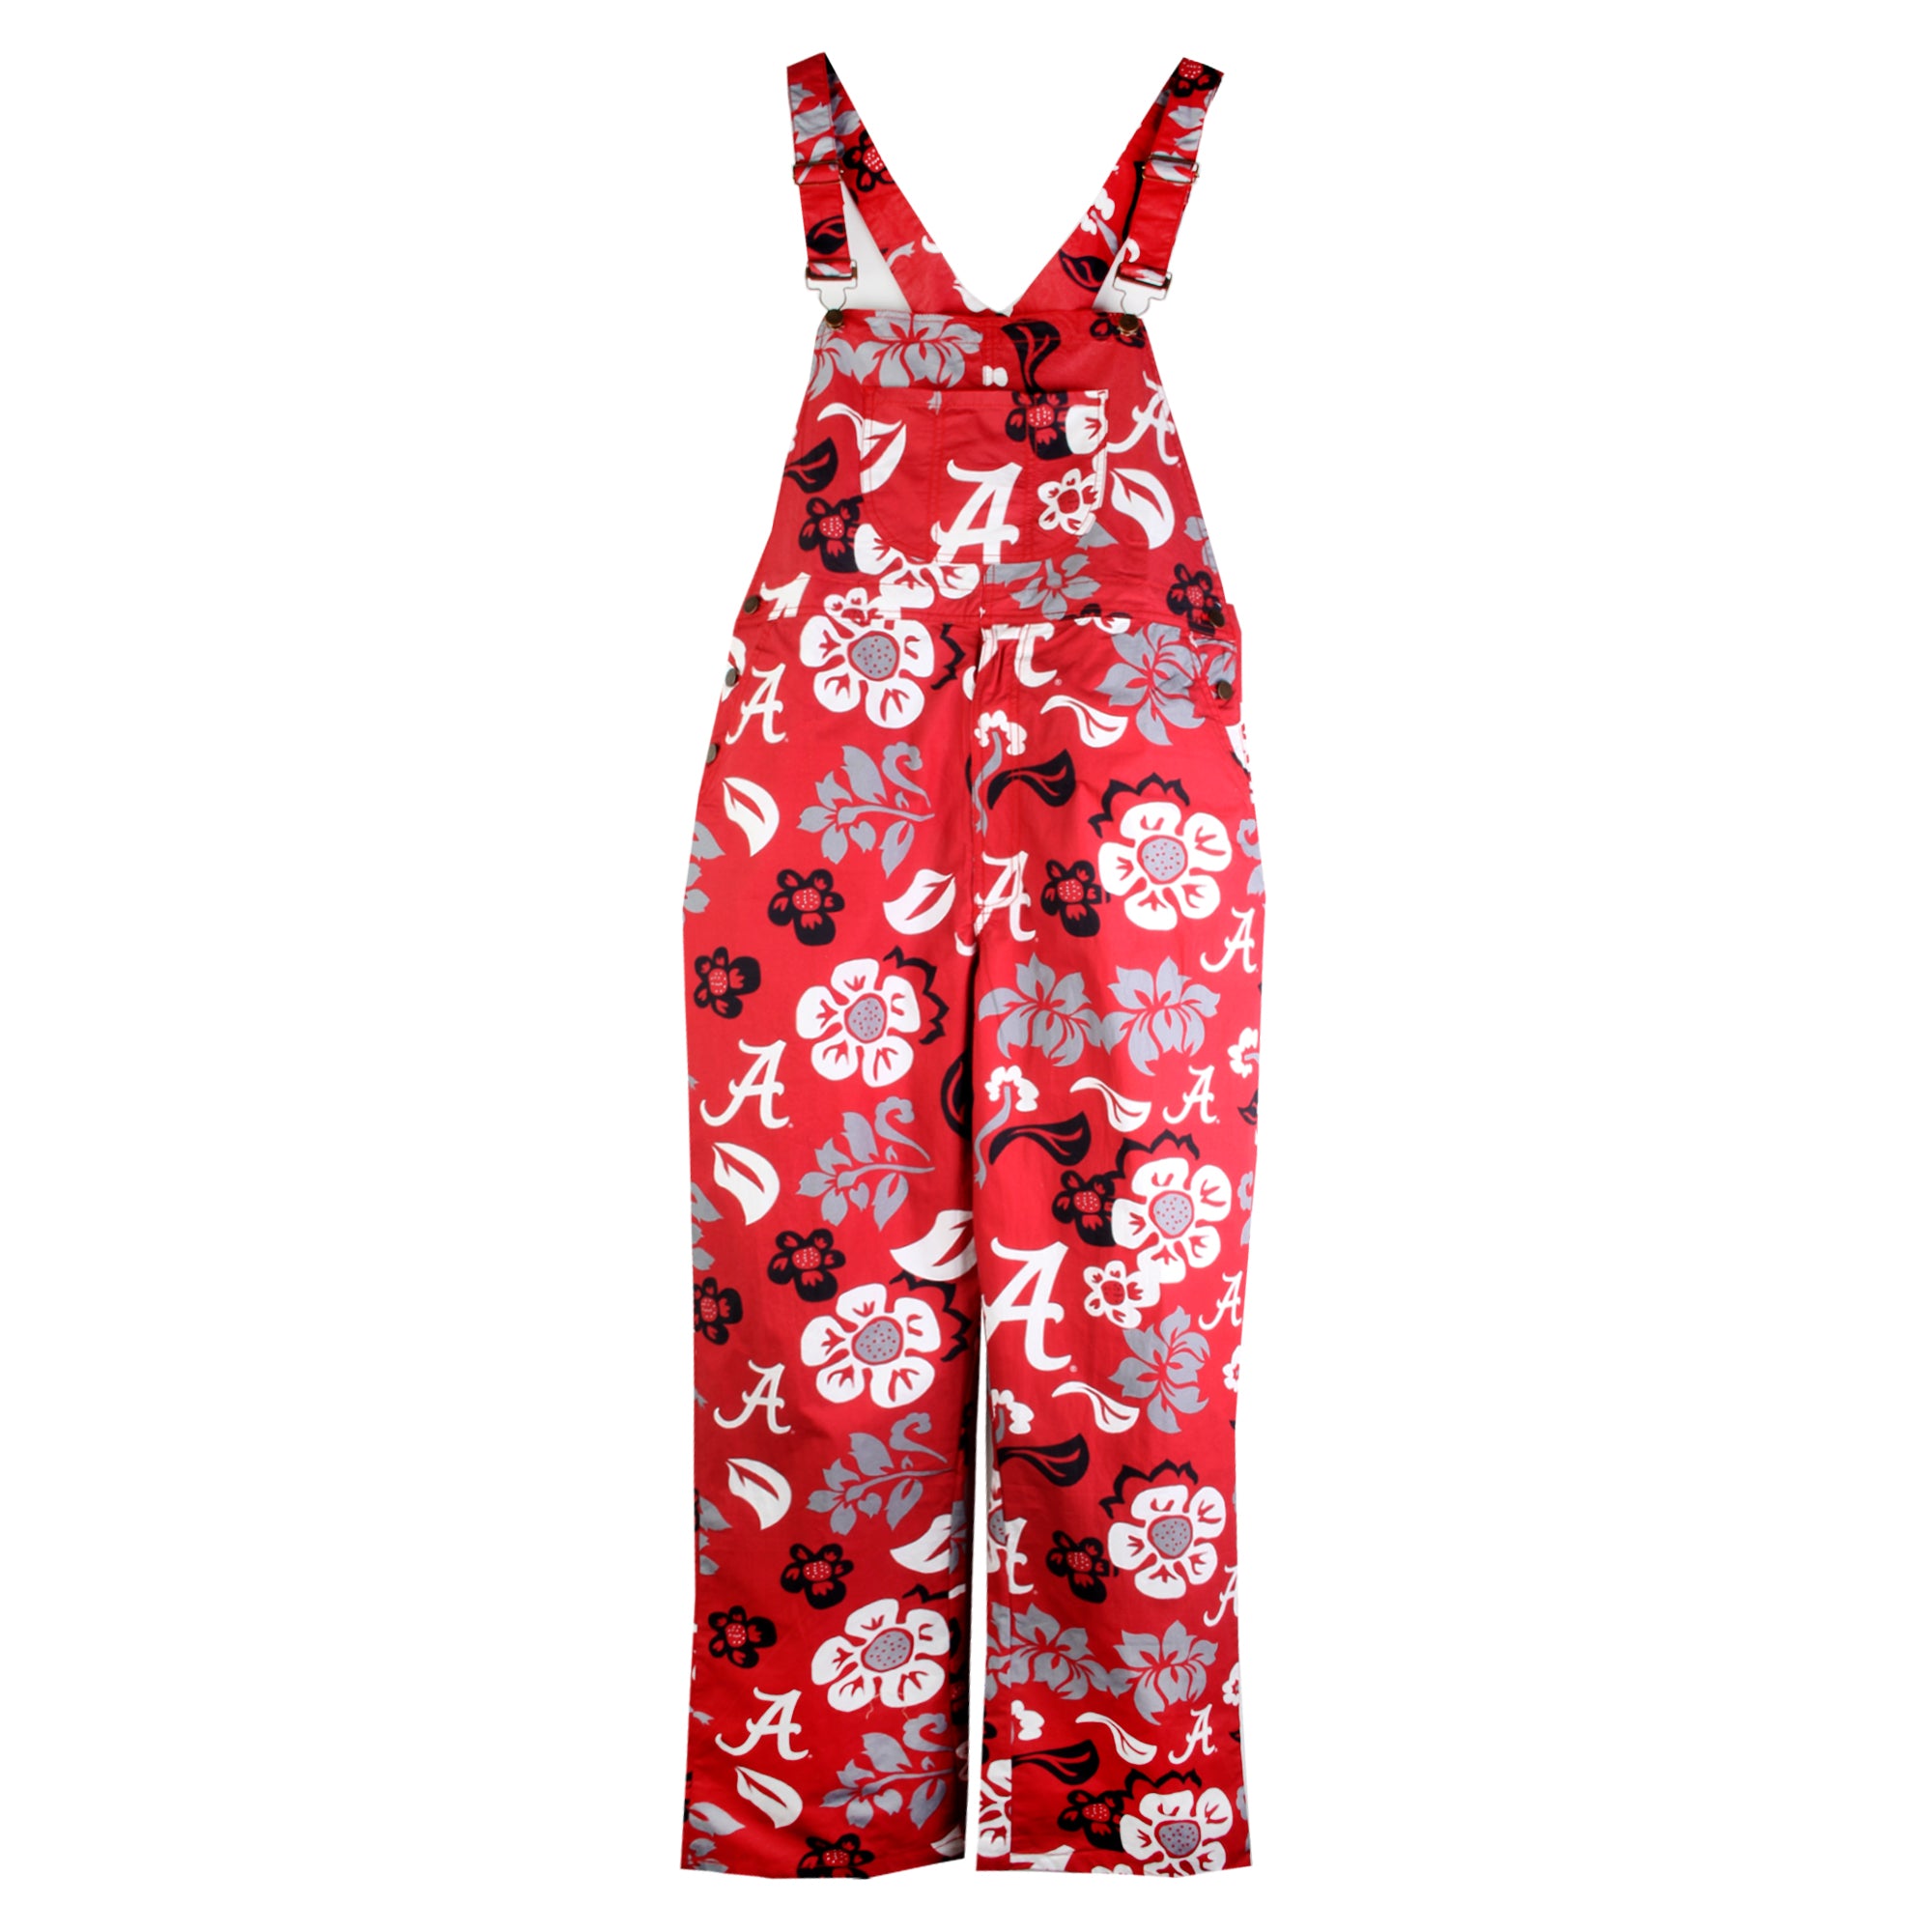 Alabama Crimson Tide Wes and Willy Mens College Floral Lightweight Fashion Overalls